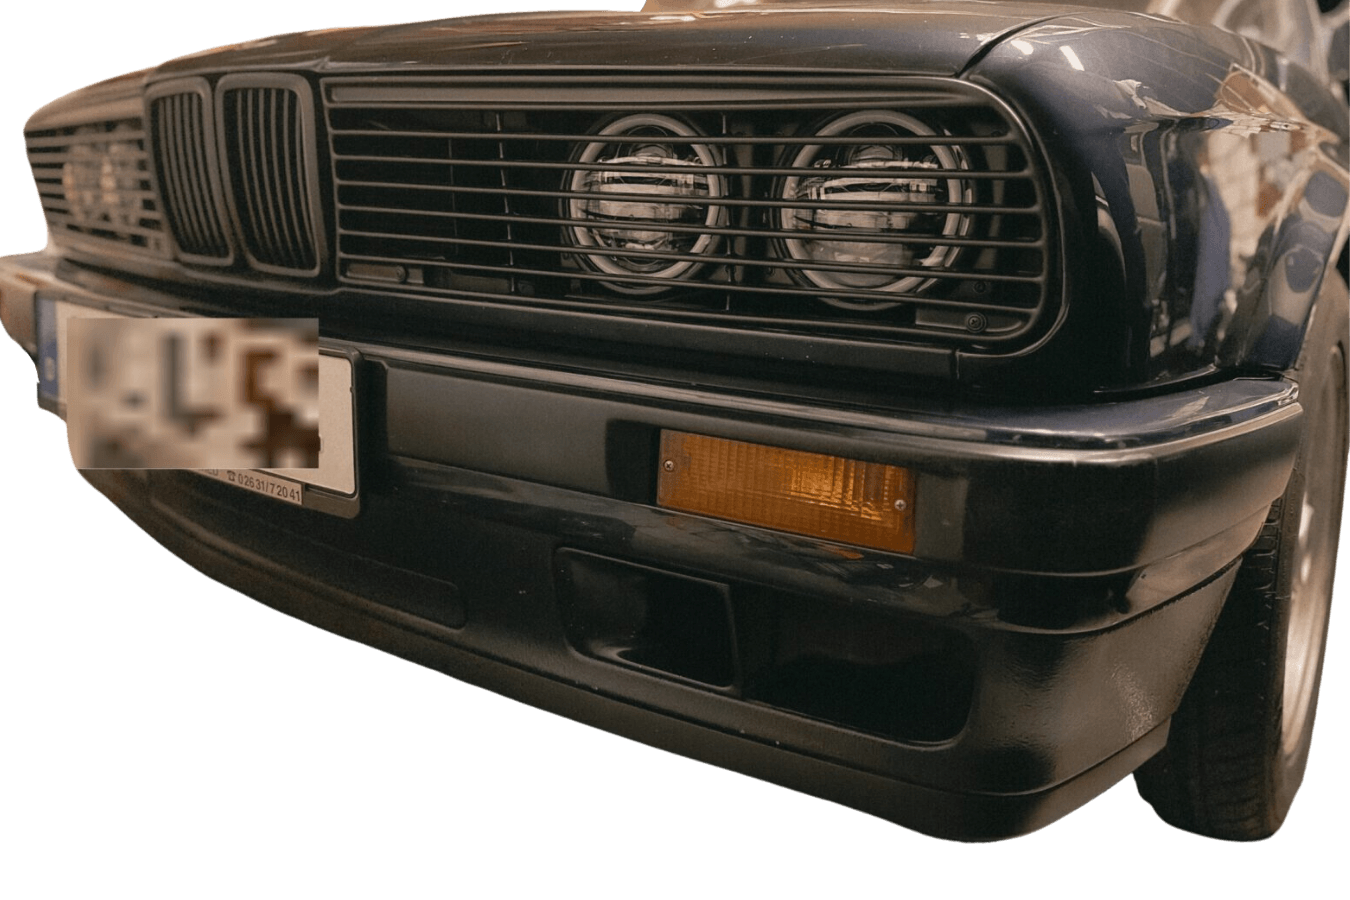 Sleek black bwm e30 coupe with detailed front grill on a foggy road on  Craiyon